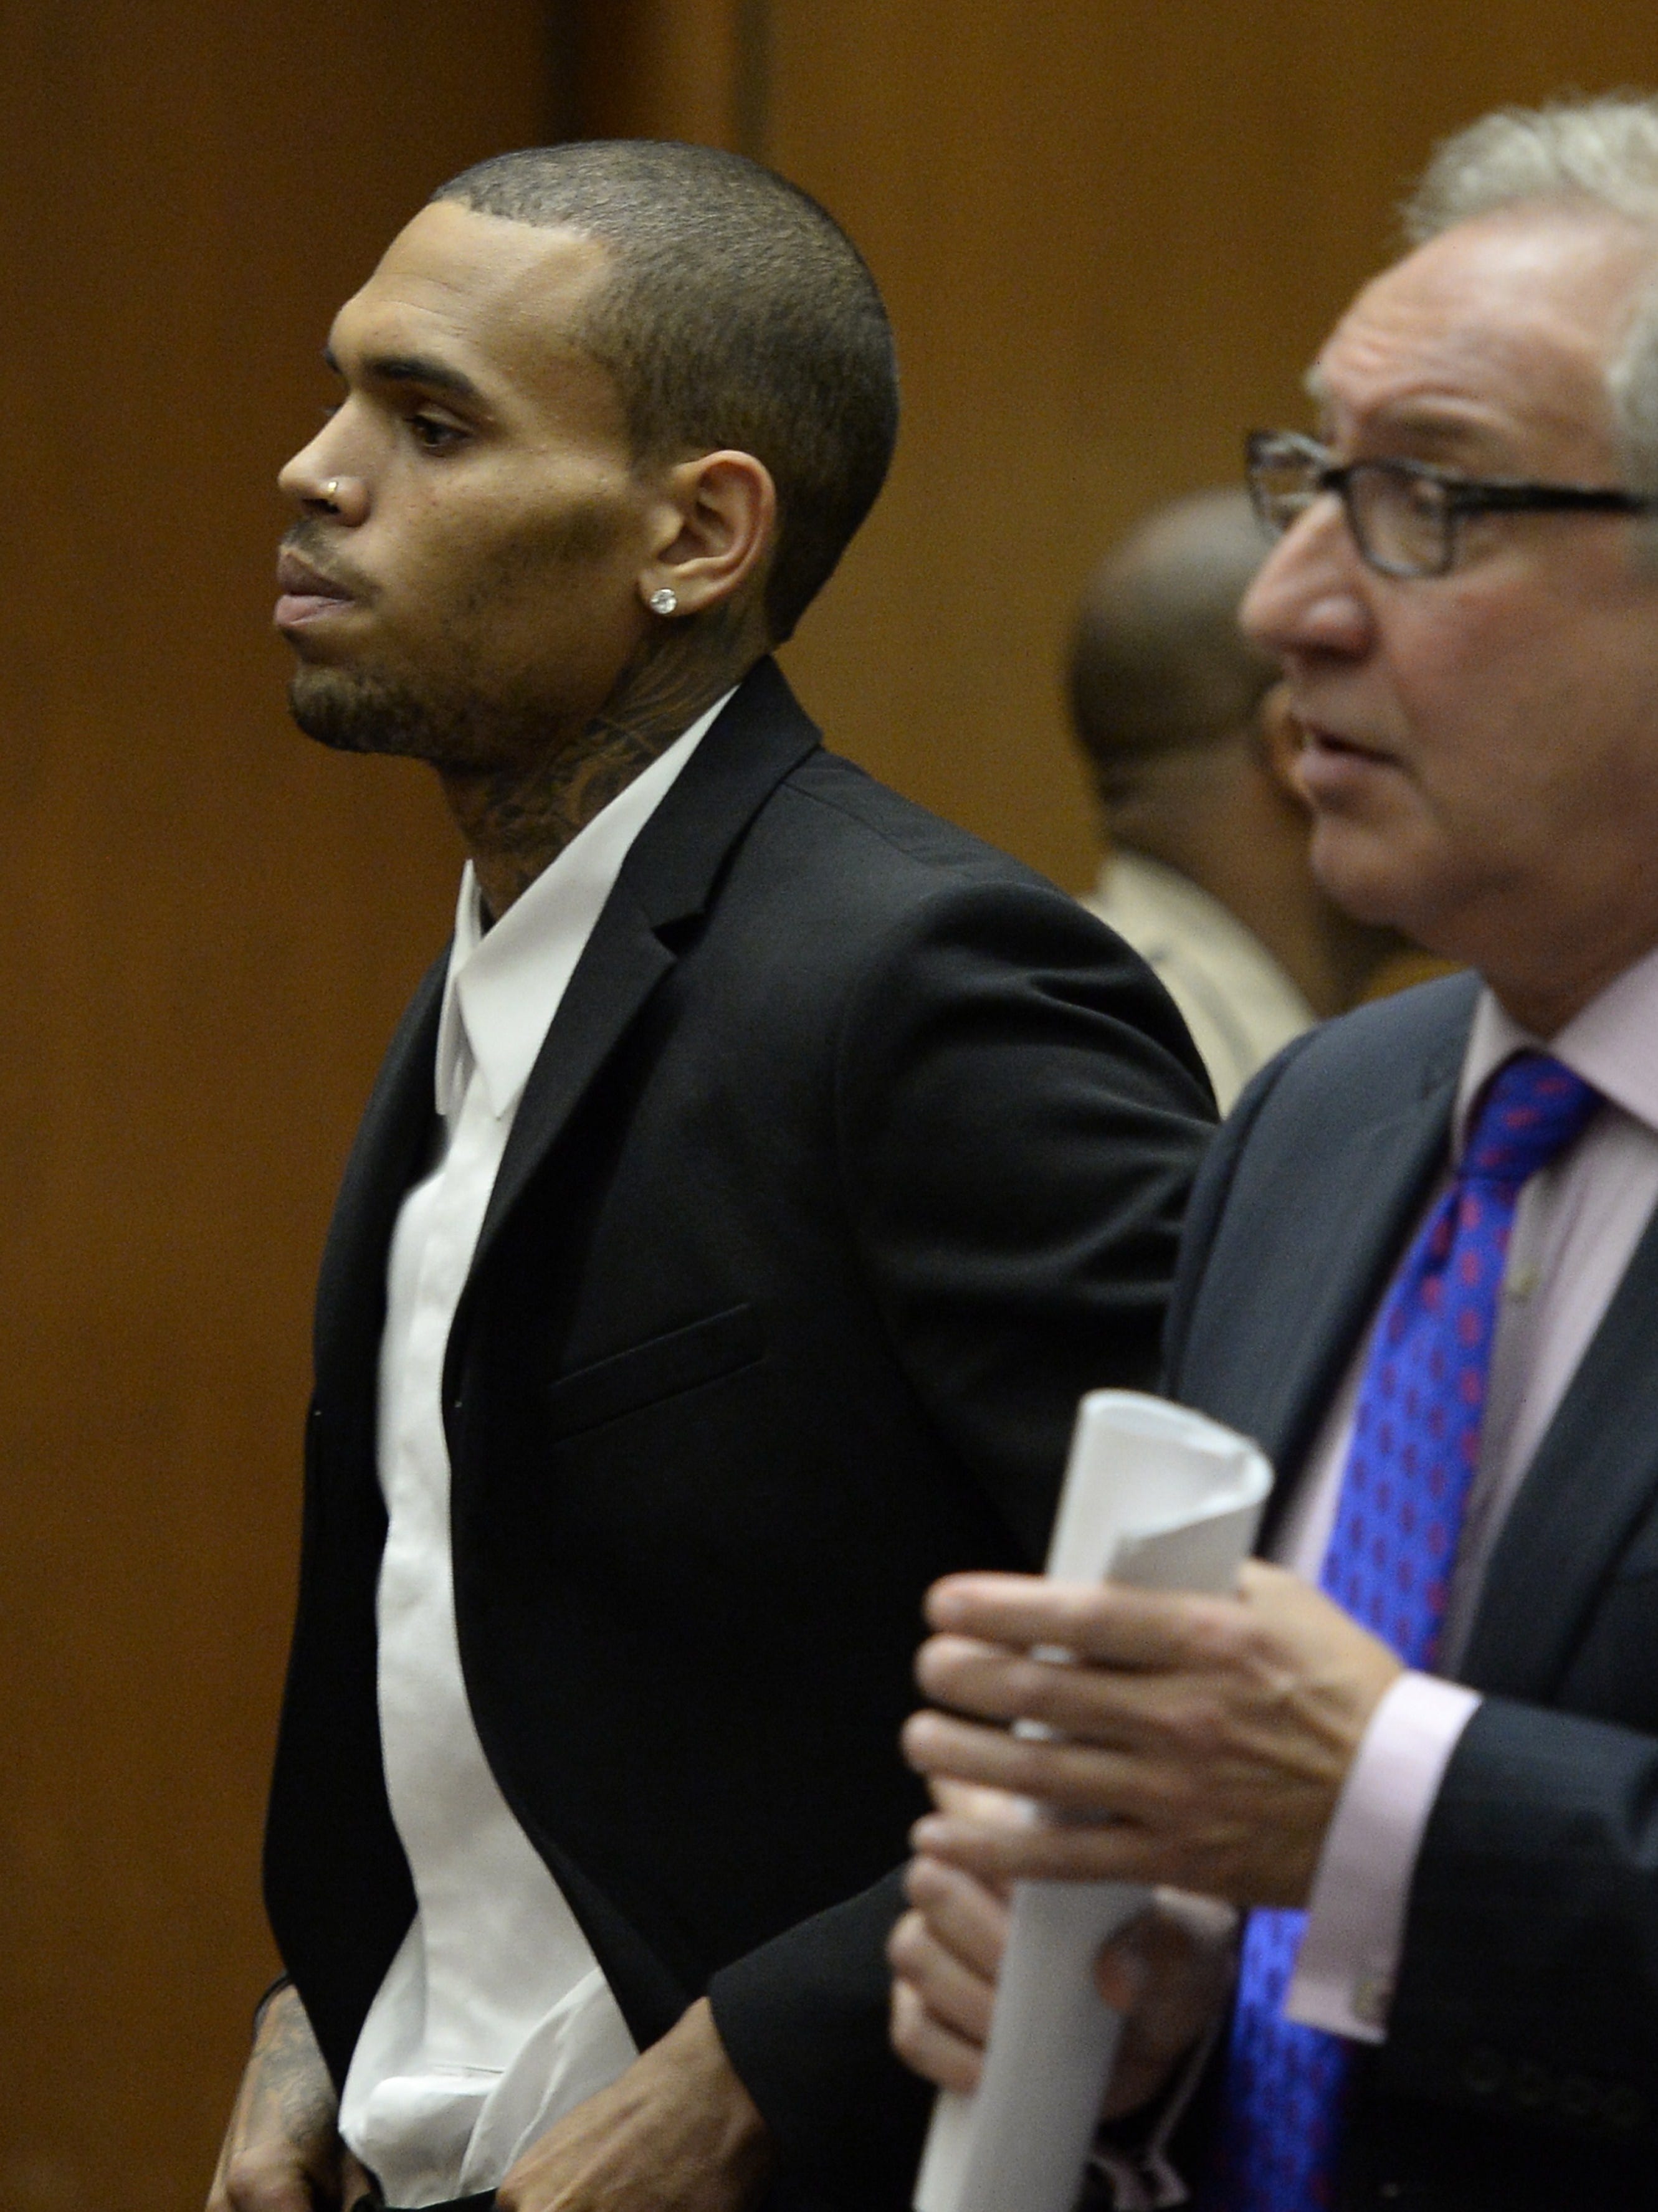 Ten Years After Chris Brown S Assault On Rihanna He S Only Become More Allegedly Violent